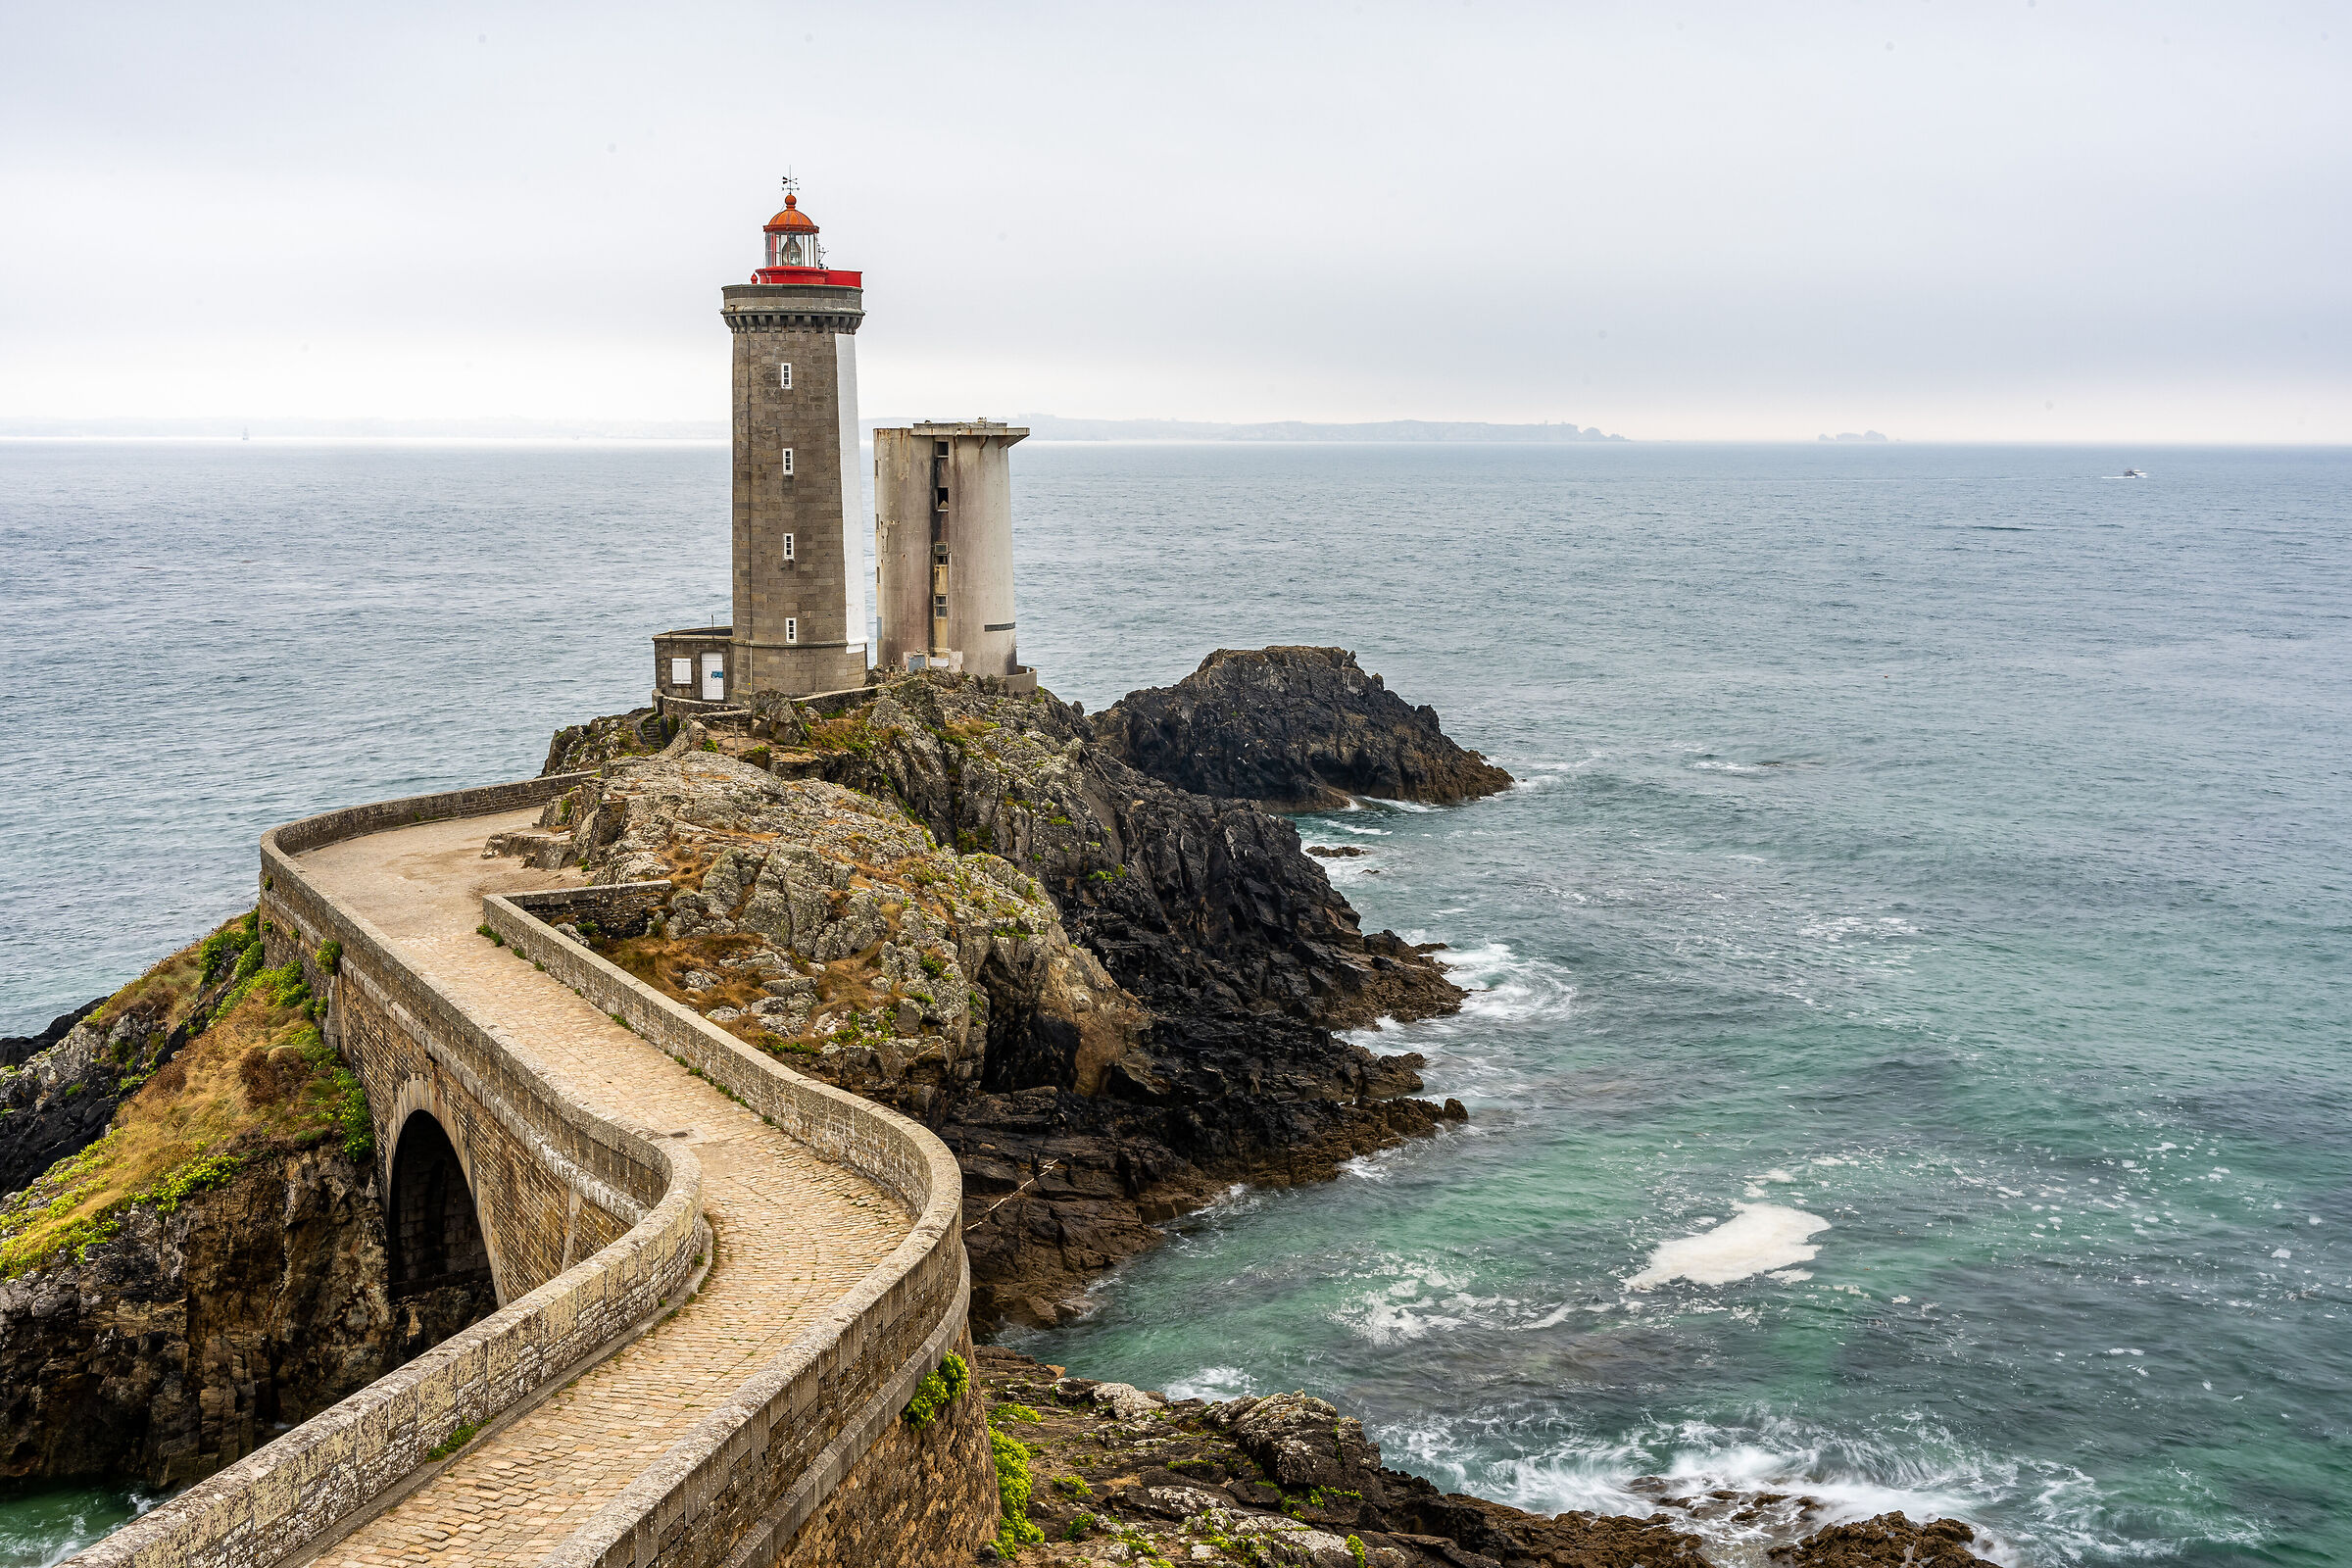 The view of the Petit Minou lighthouse on the sea...